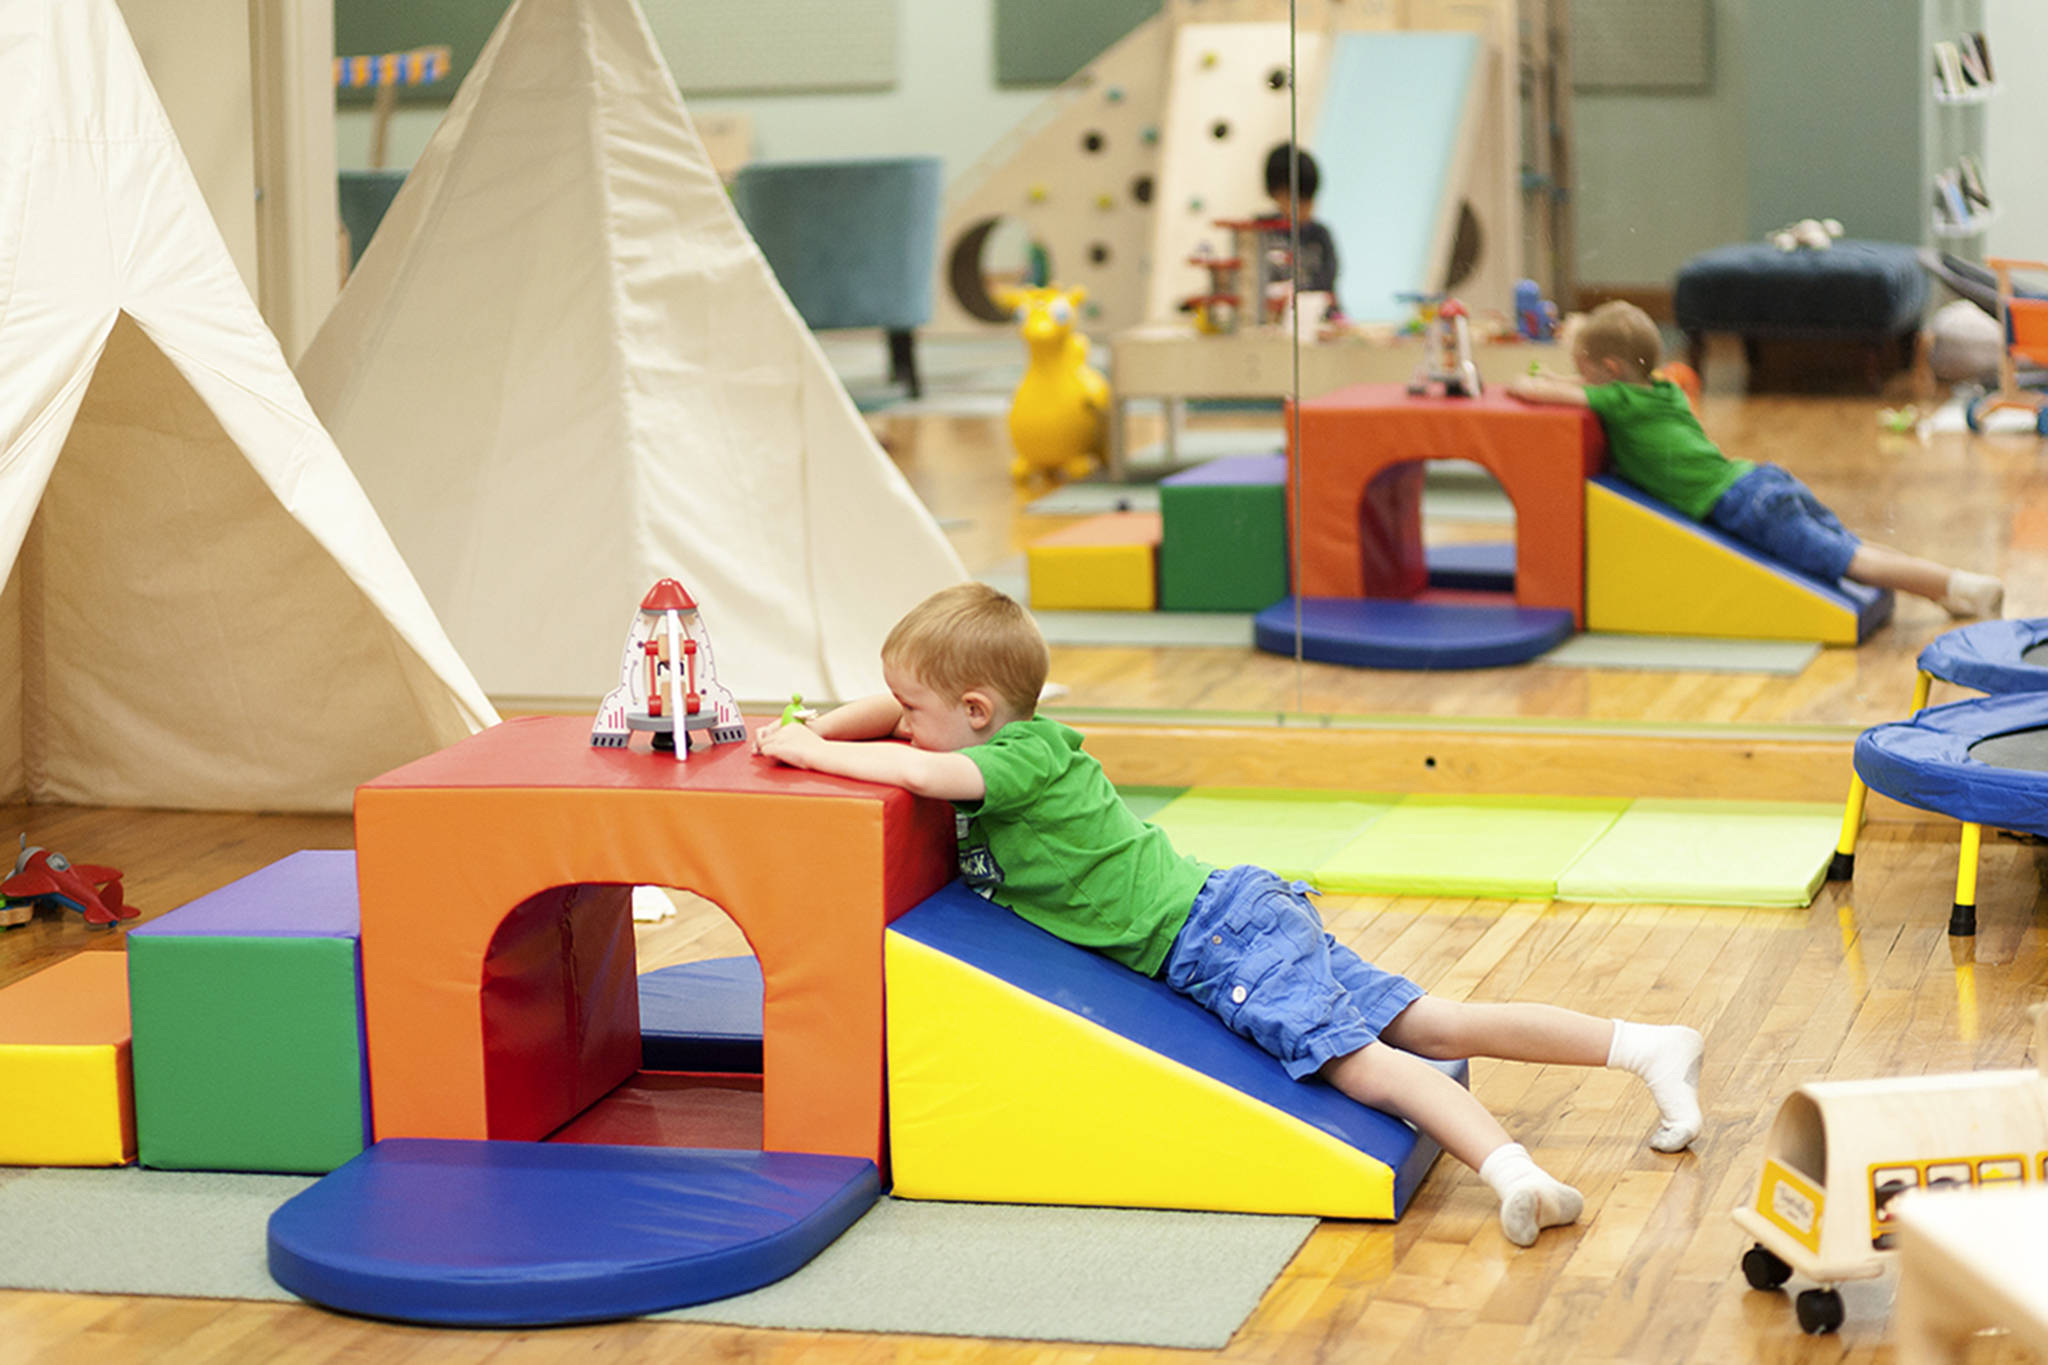 Roo’s World facility merges working with parenting